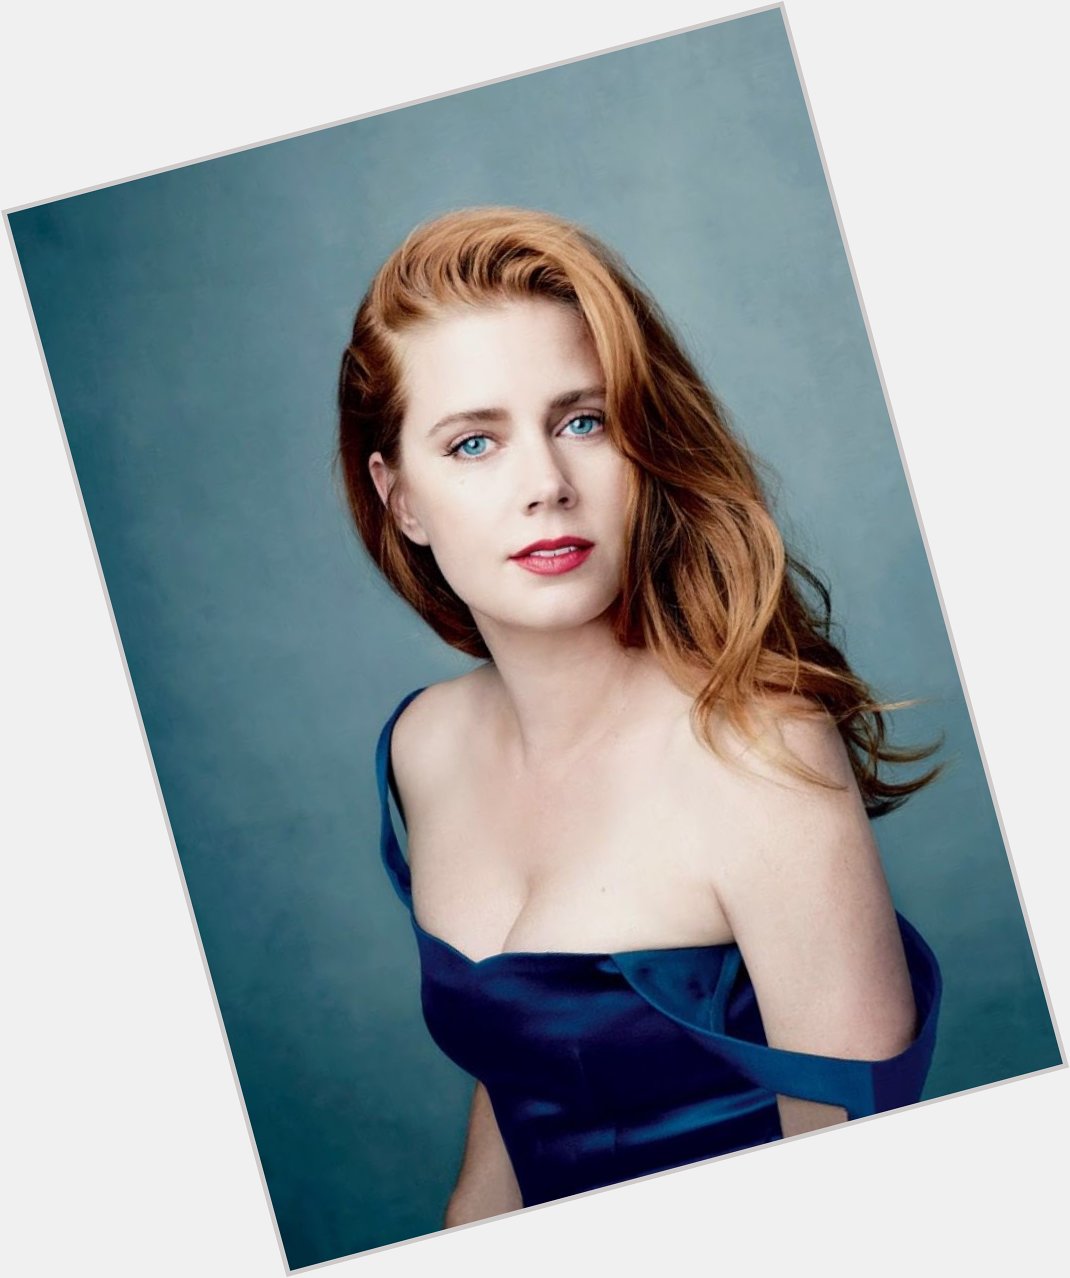 HAPPY BIRTHDAY TO MY ABSOLUTE QUEEN AMY ADAMS 